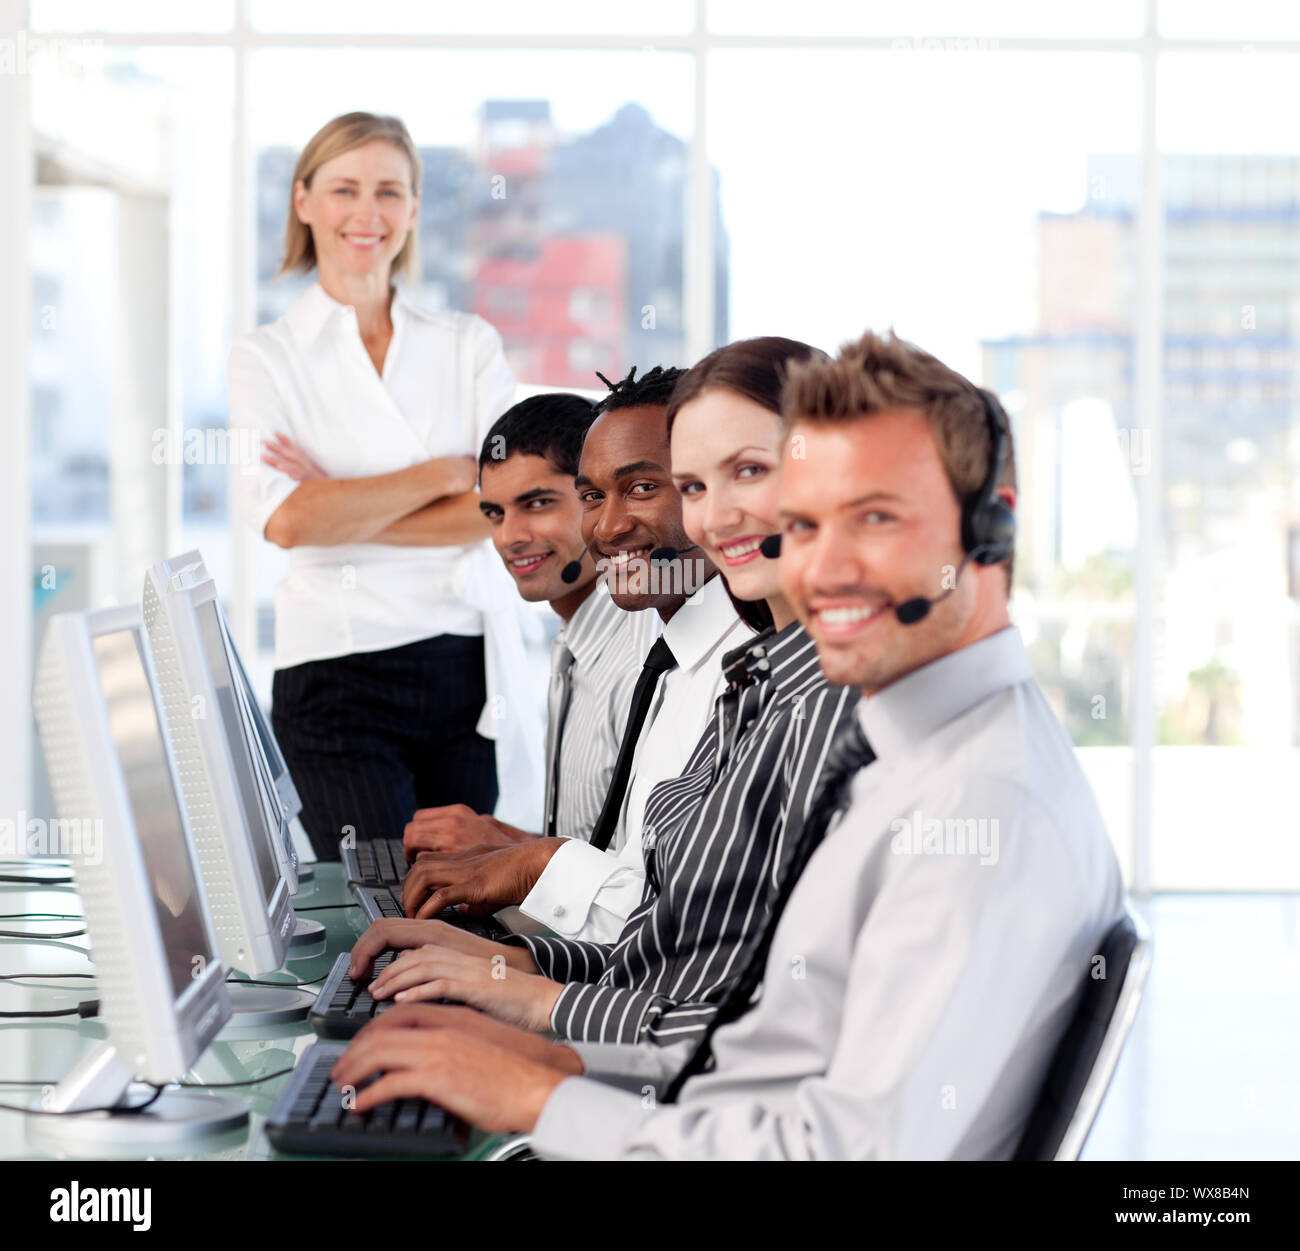 Radiant female leader managingher team in a call center Stock Photo